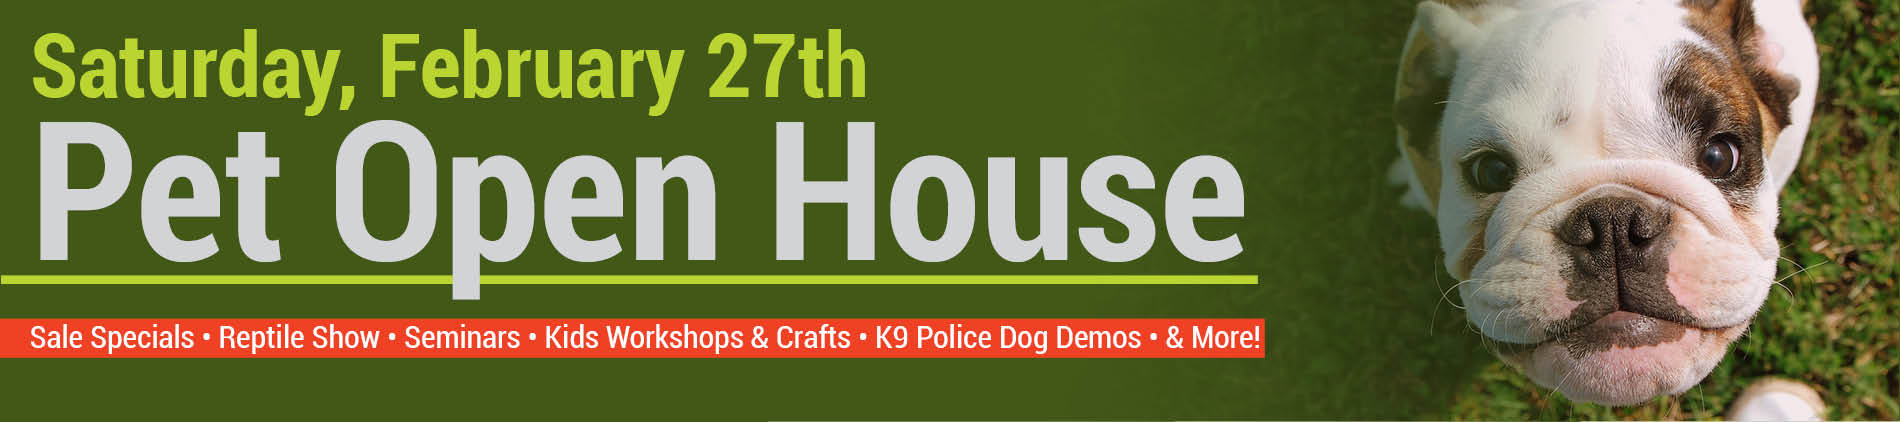 Pet Open House February 27th